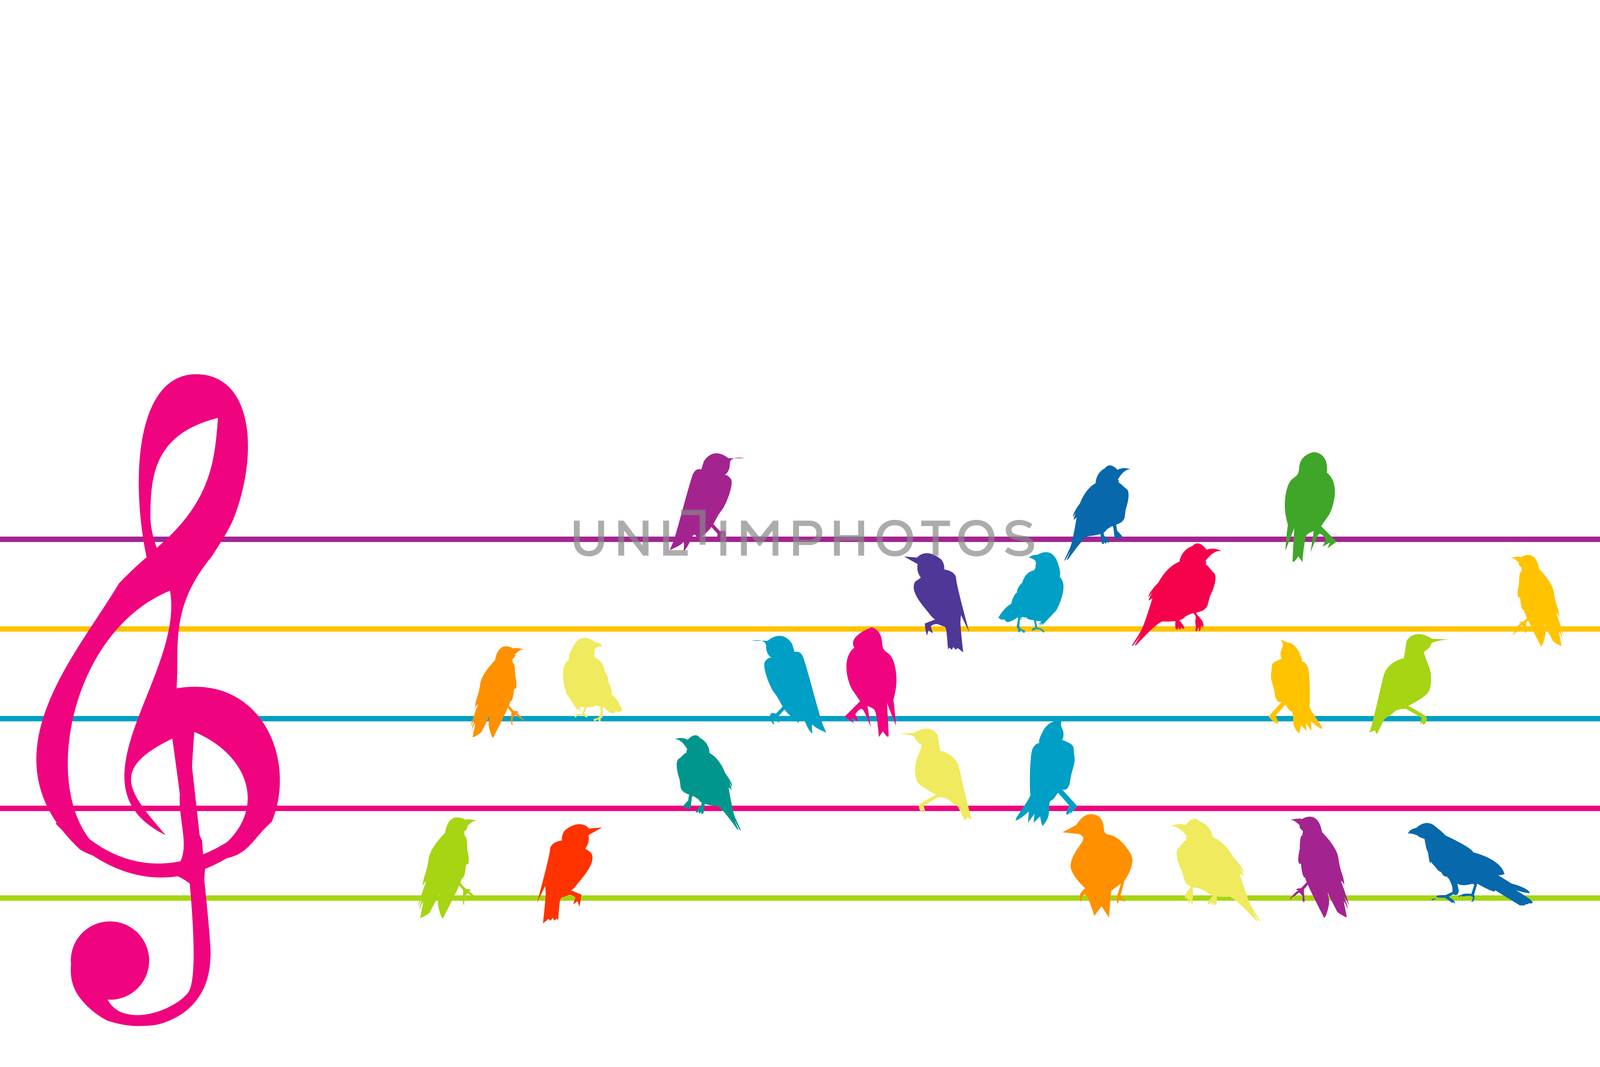 Abstract colorful music stave with birds silhouette